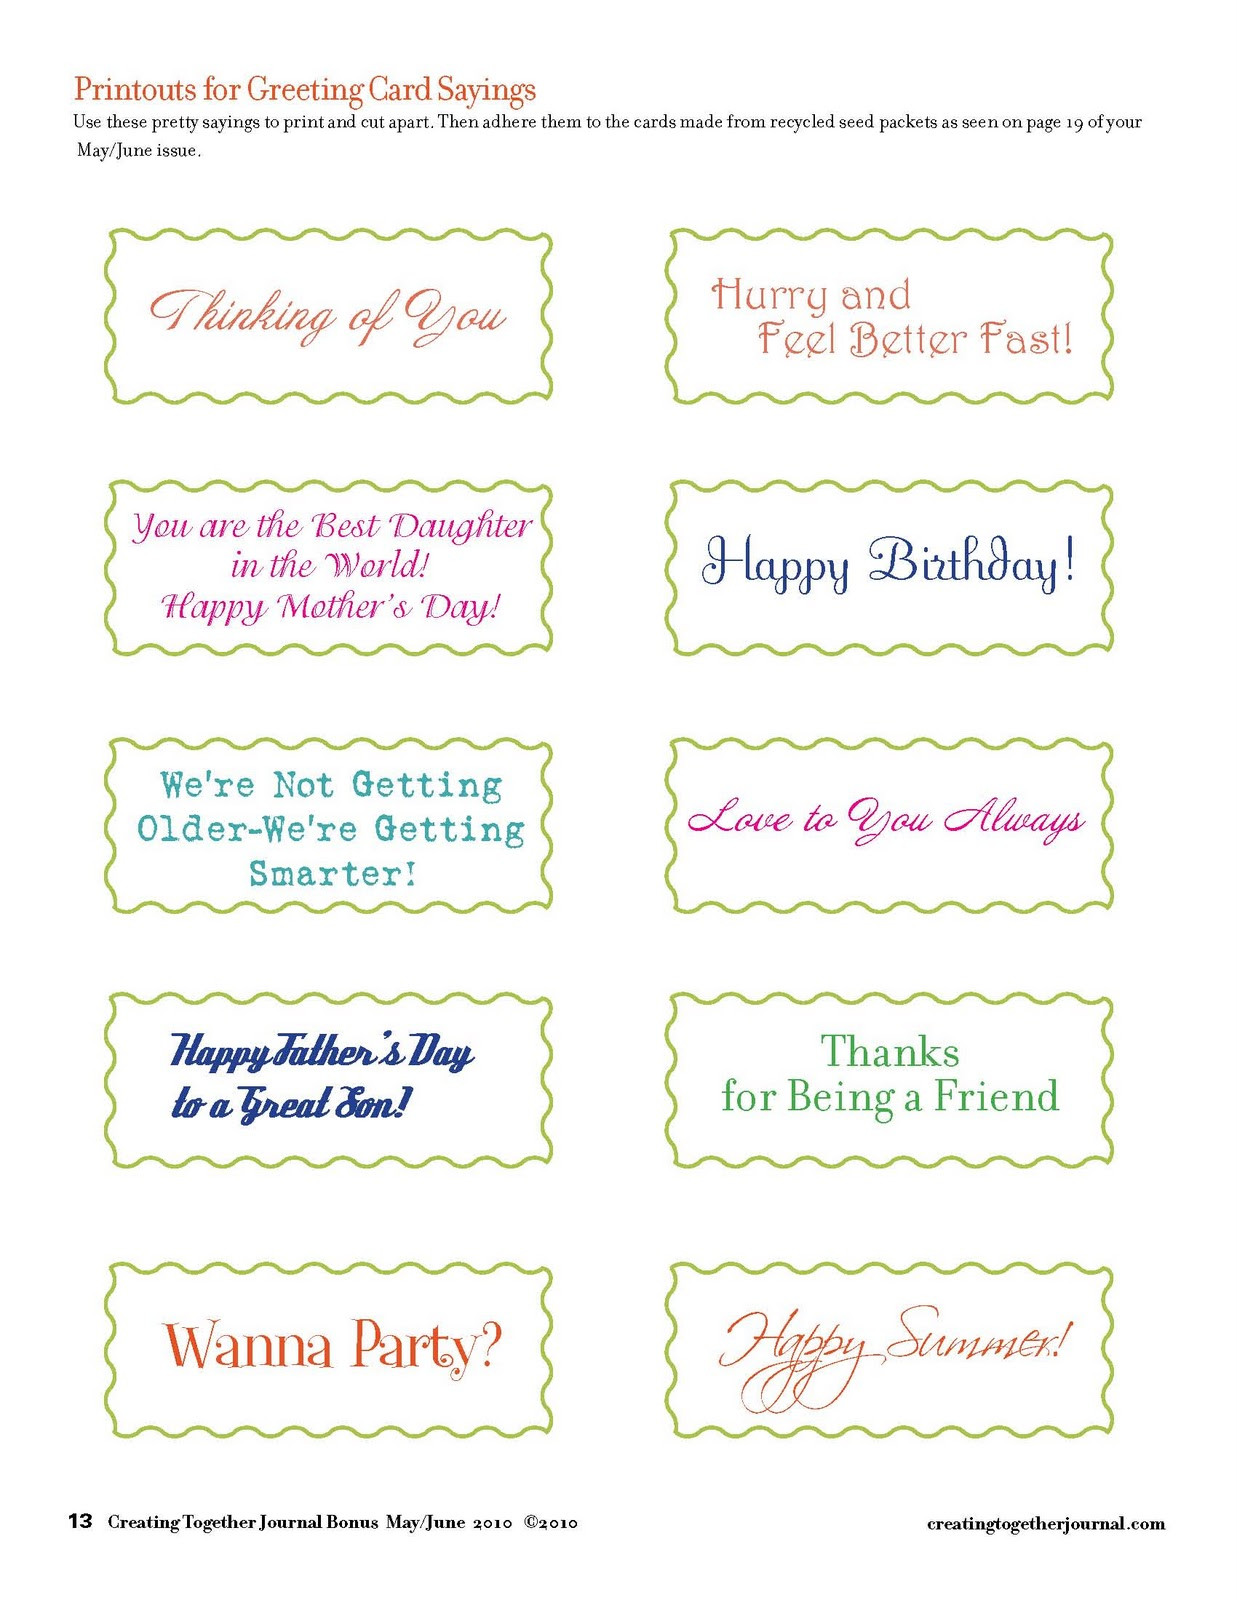 Birthday Card Verses
 Creating To her Journal Printouts for Greeting Card Sayings